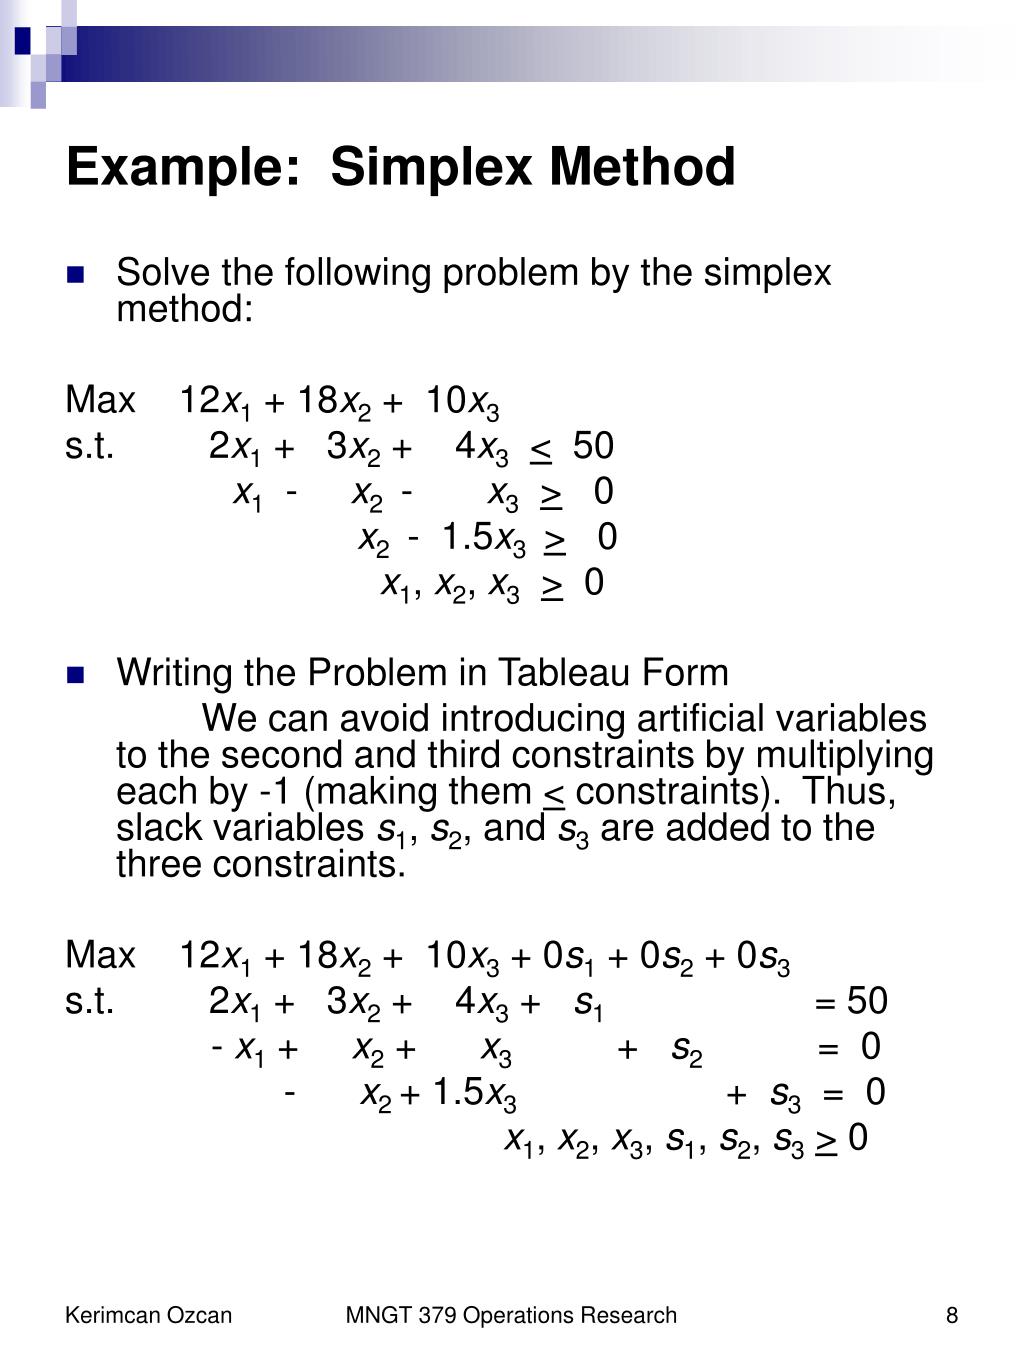 solved problems linear programming simplex method